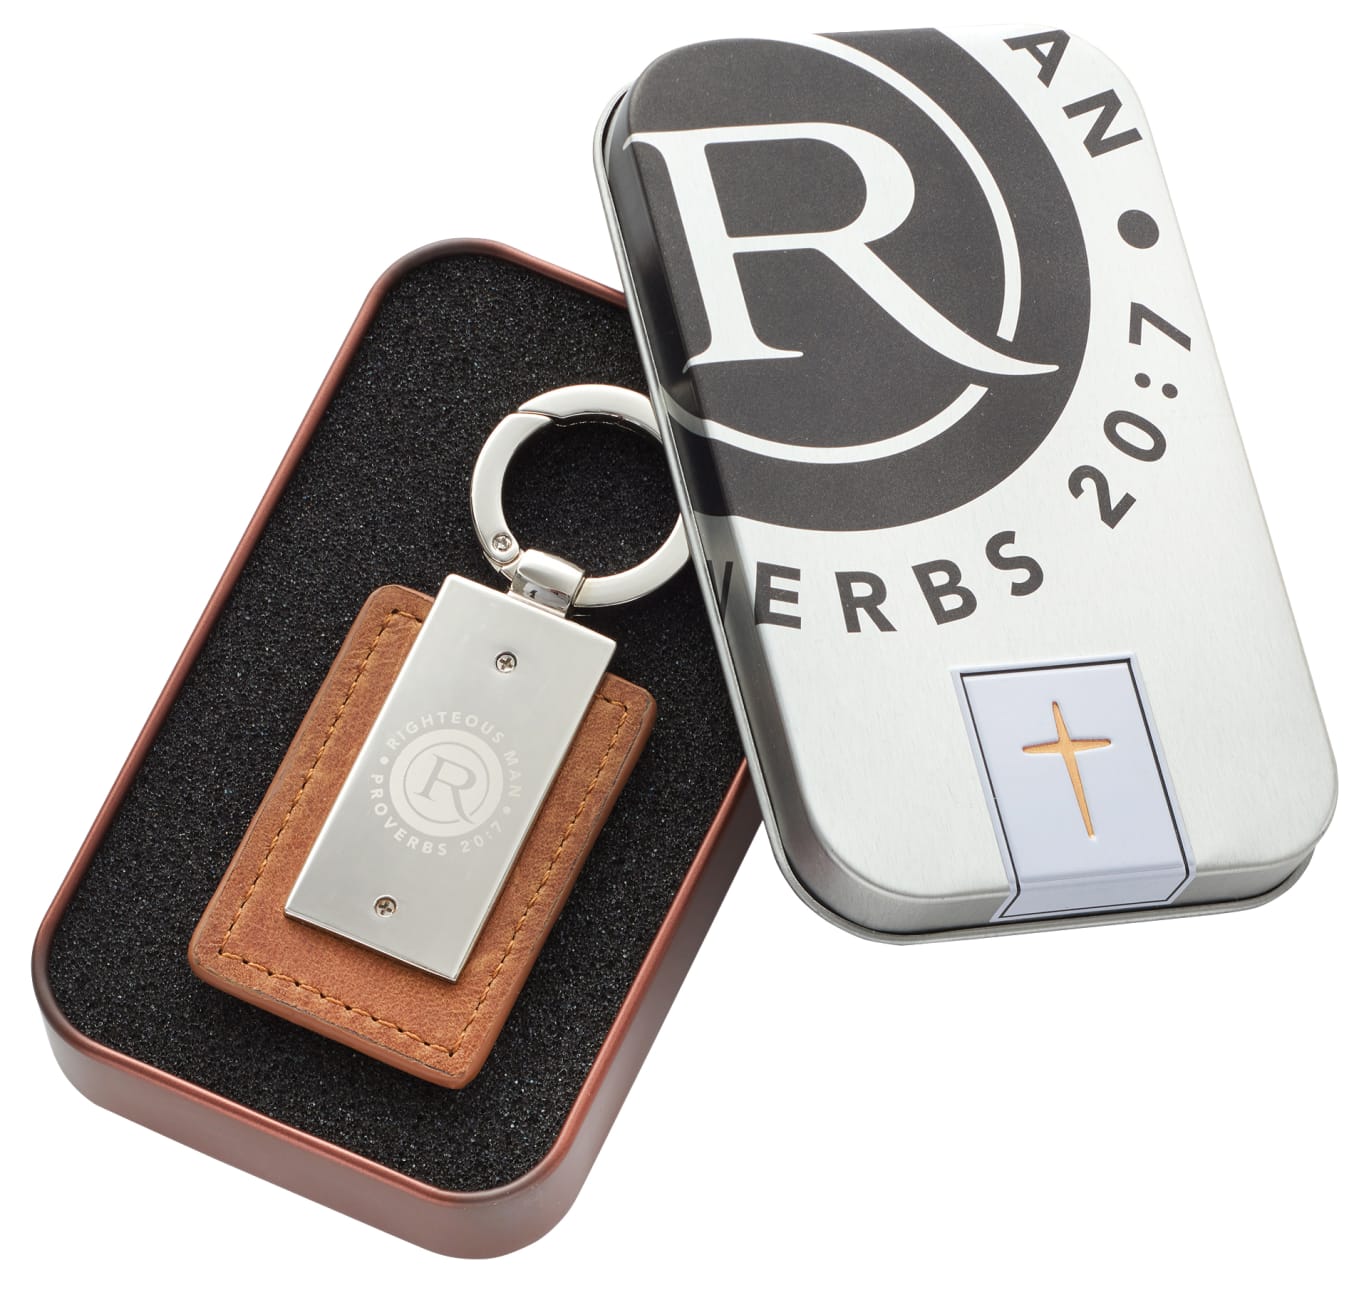 Keyring in Tin: Righteous Man, Brown/Silver (Proverbs 20:7) Jewellery